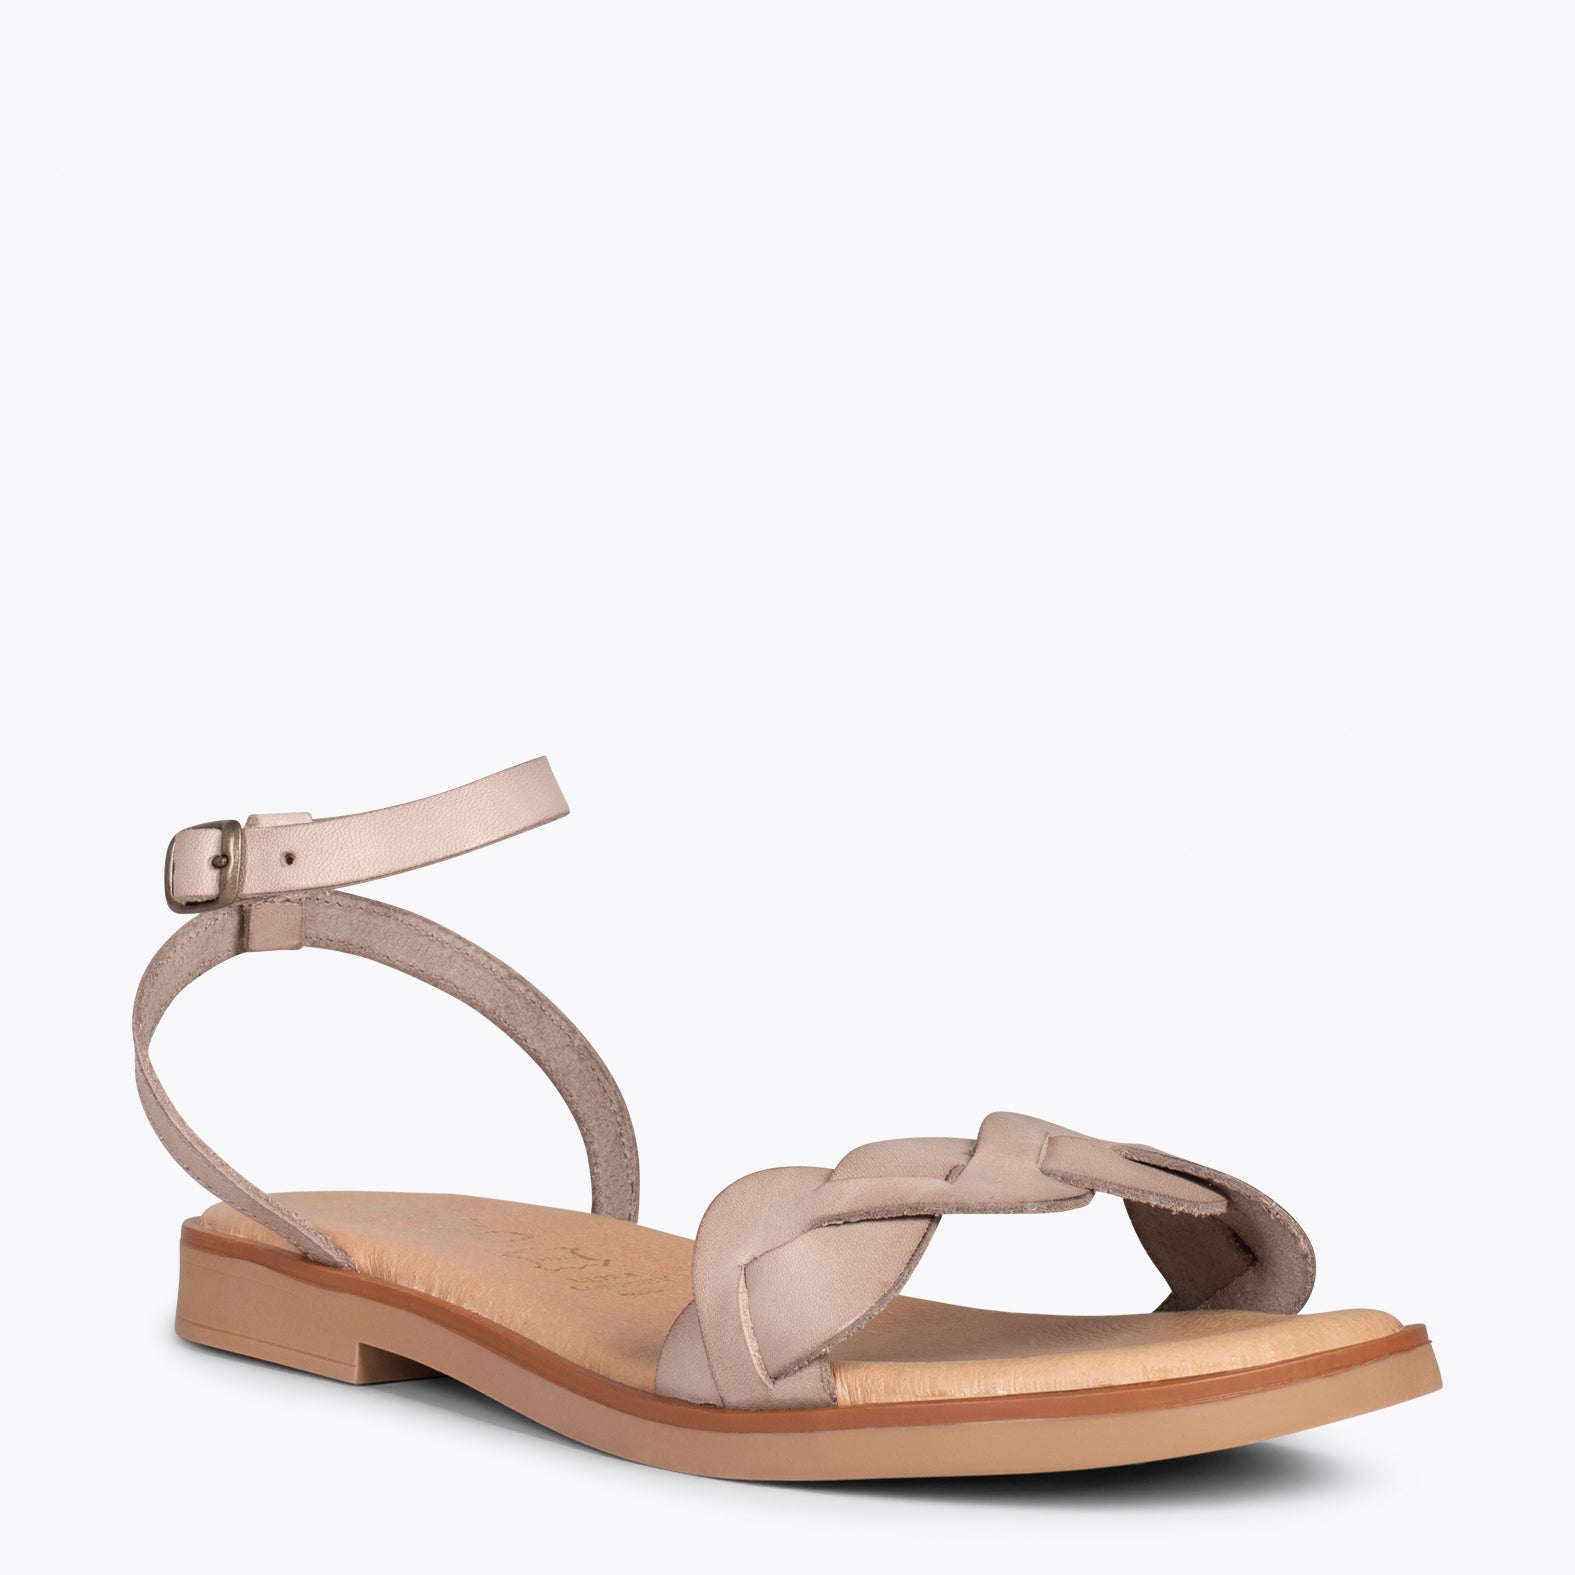 ARECA – TAUPE flat sandal with braided upper